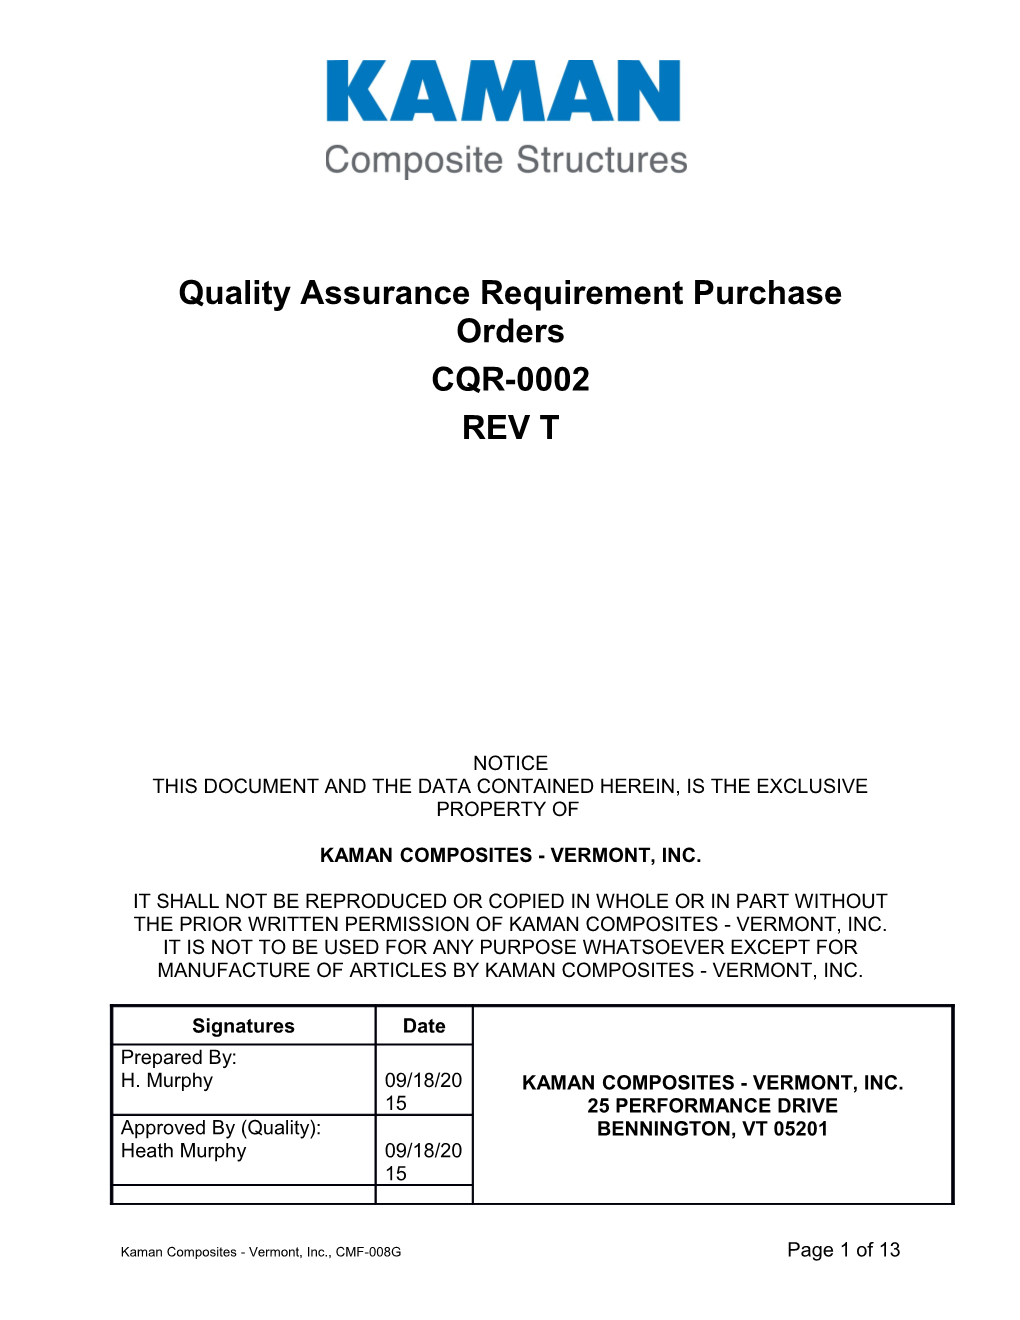 Quality Assurance Requirement Purchase Orders s1